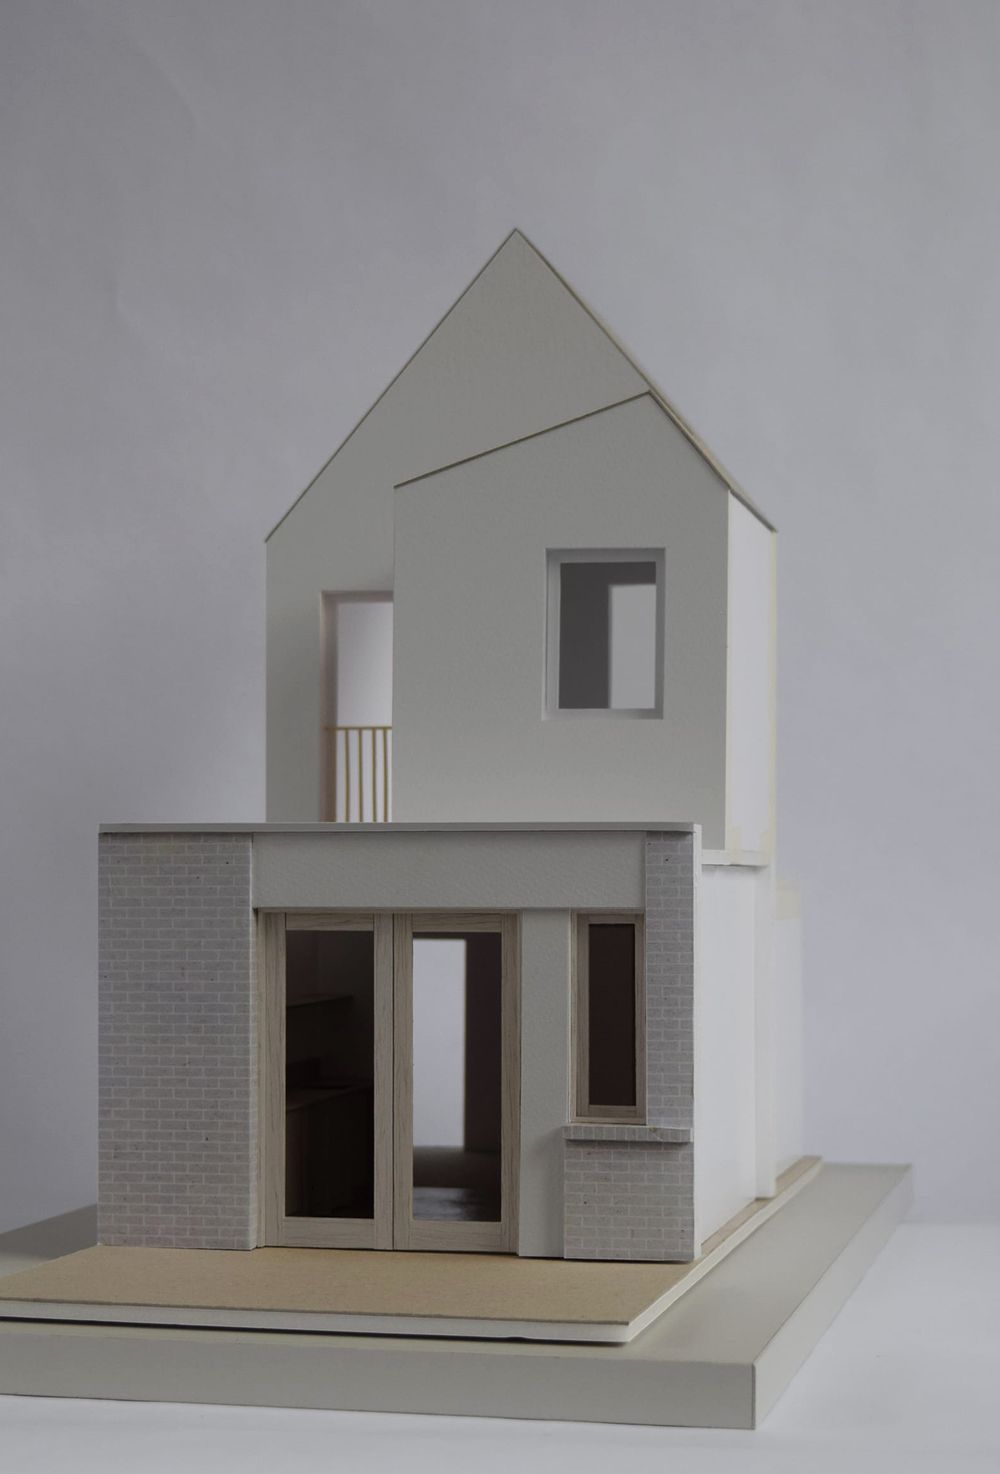 Physical model of the proposed rear extension within From Works' Francis Road Project.